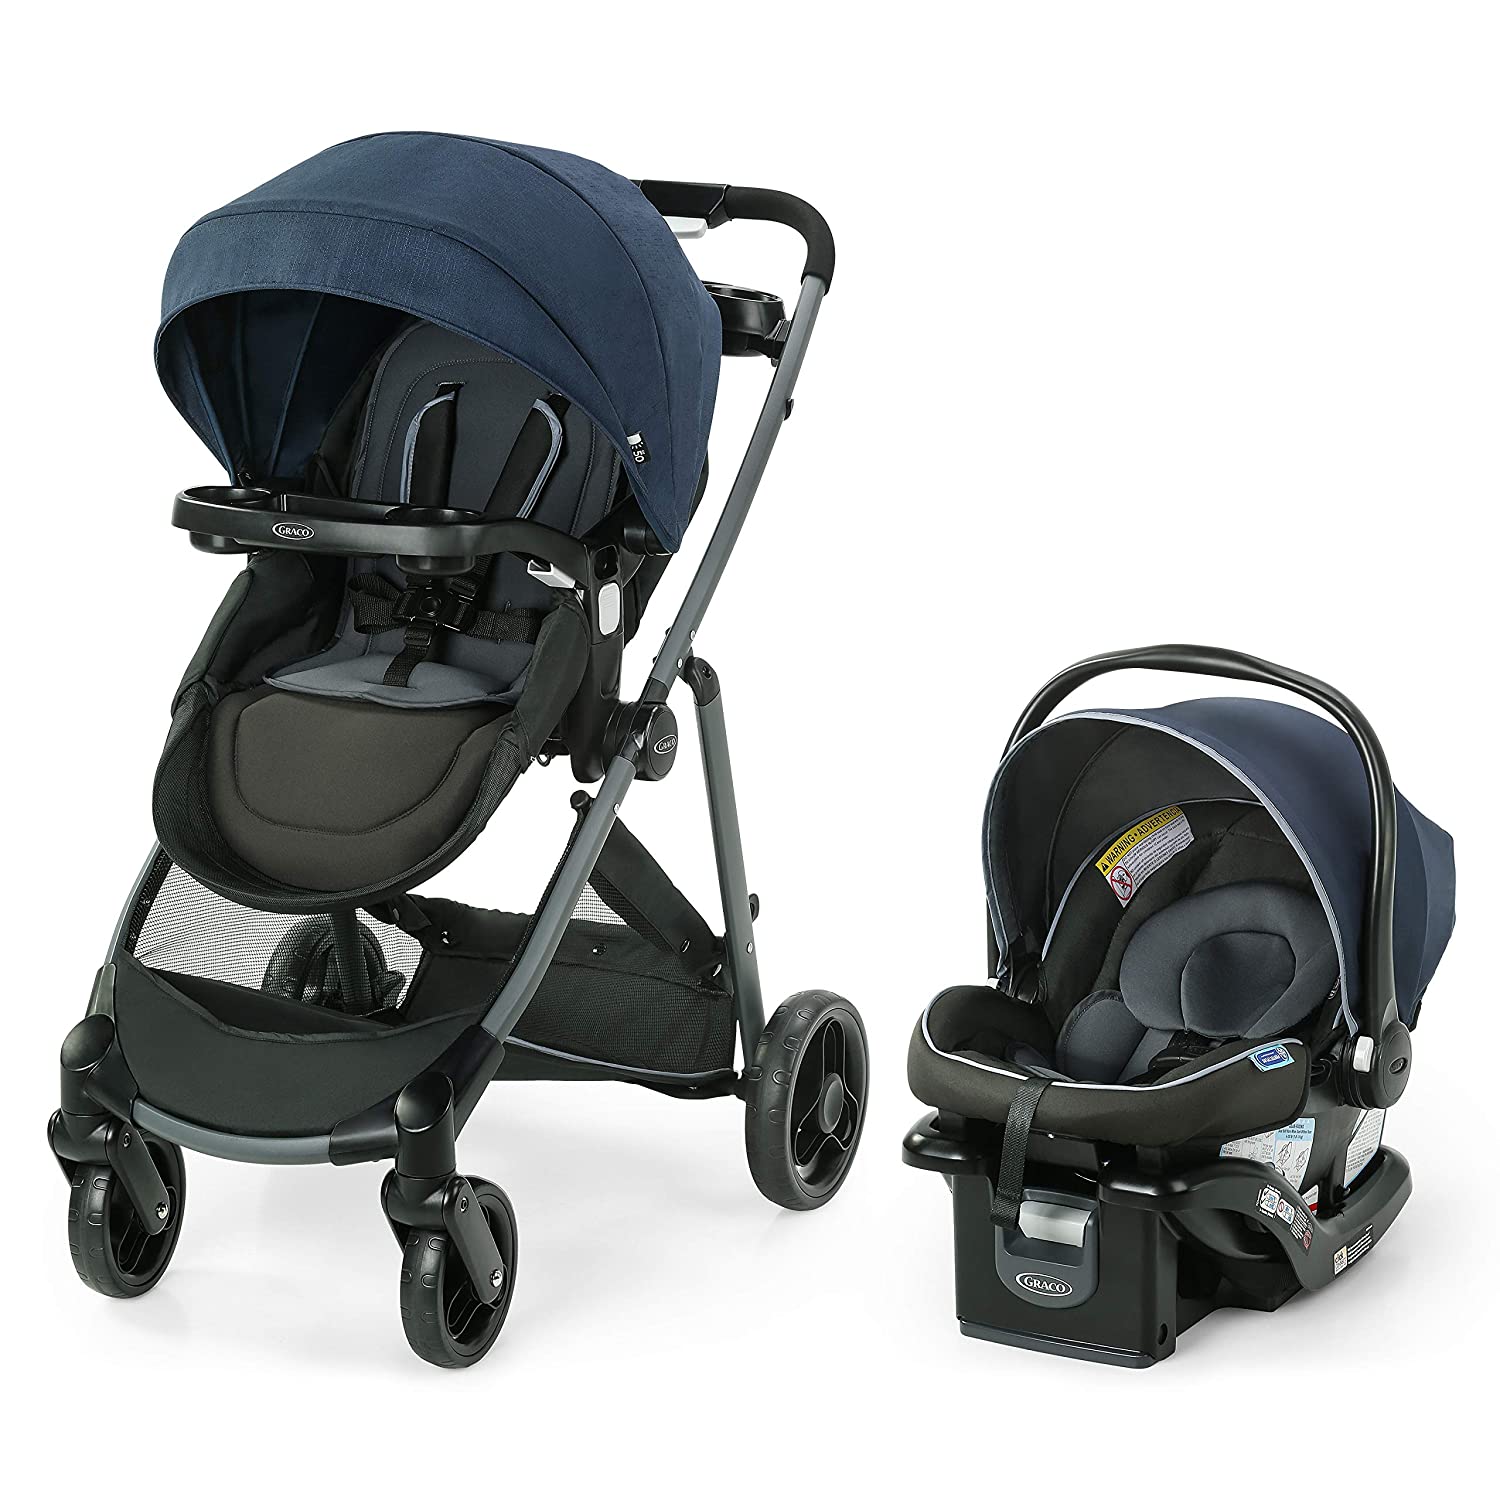 Graco Stroller with Car Seat